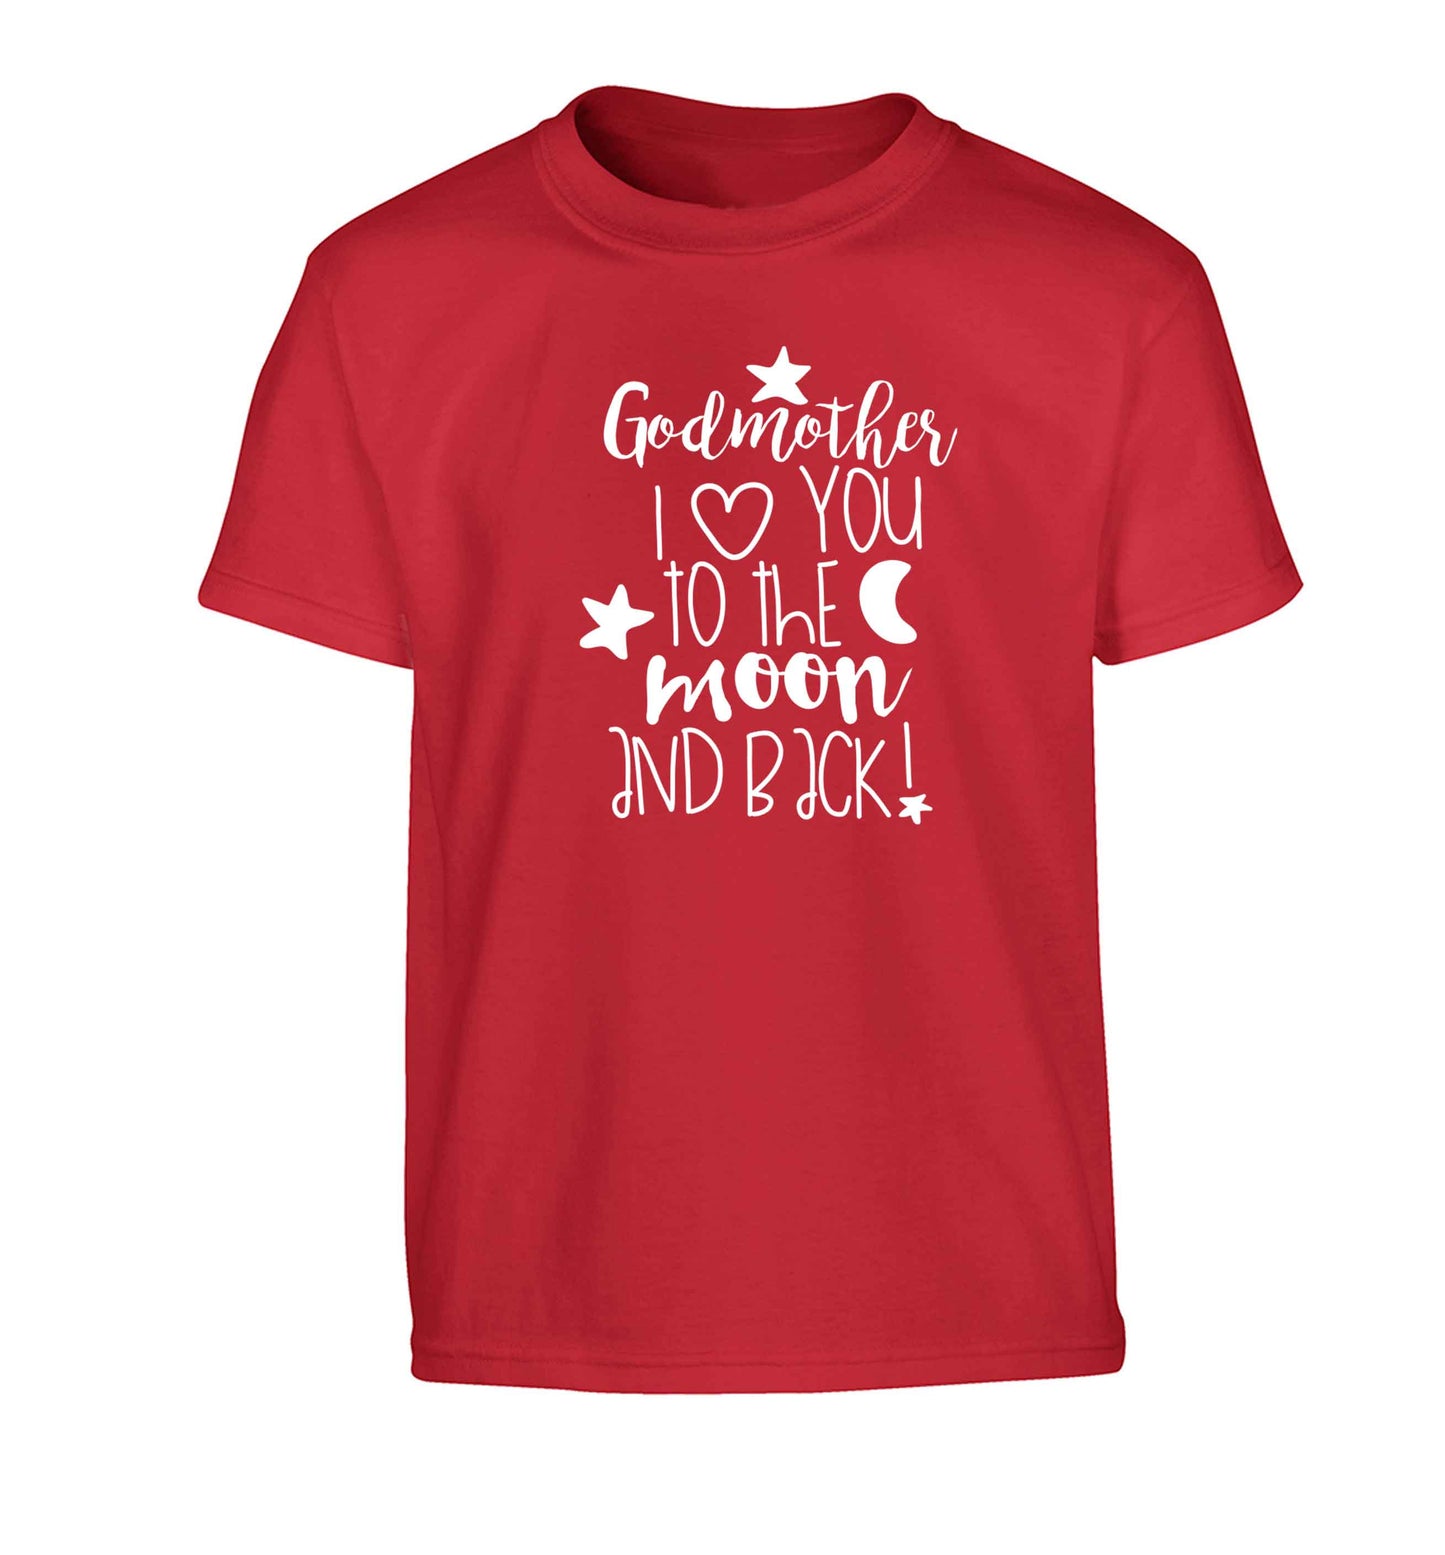 Godmother I love you to the moon and back Children's red Tshirt 12-13 Years